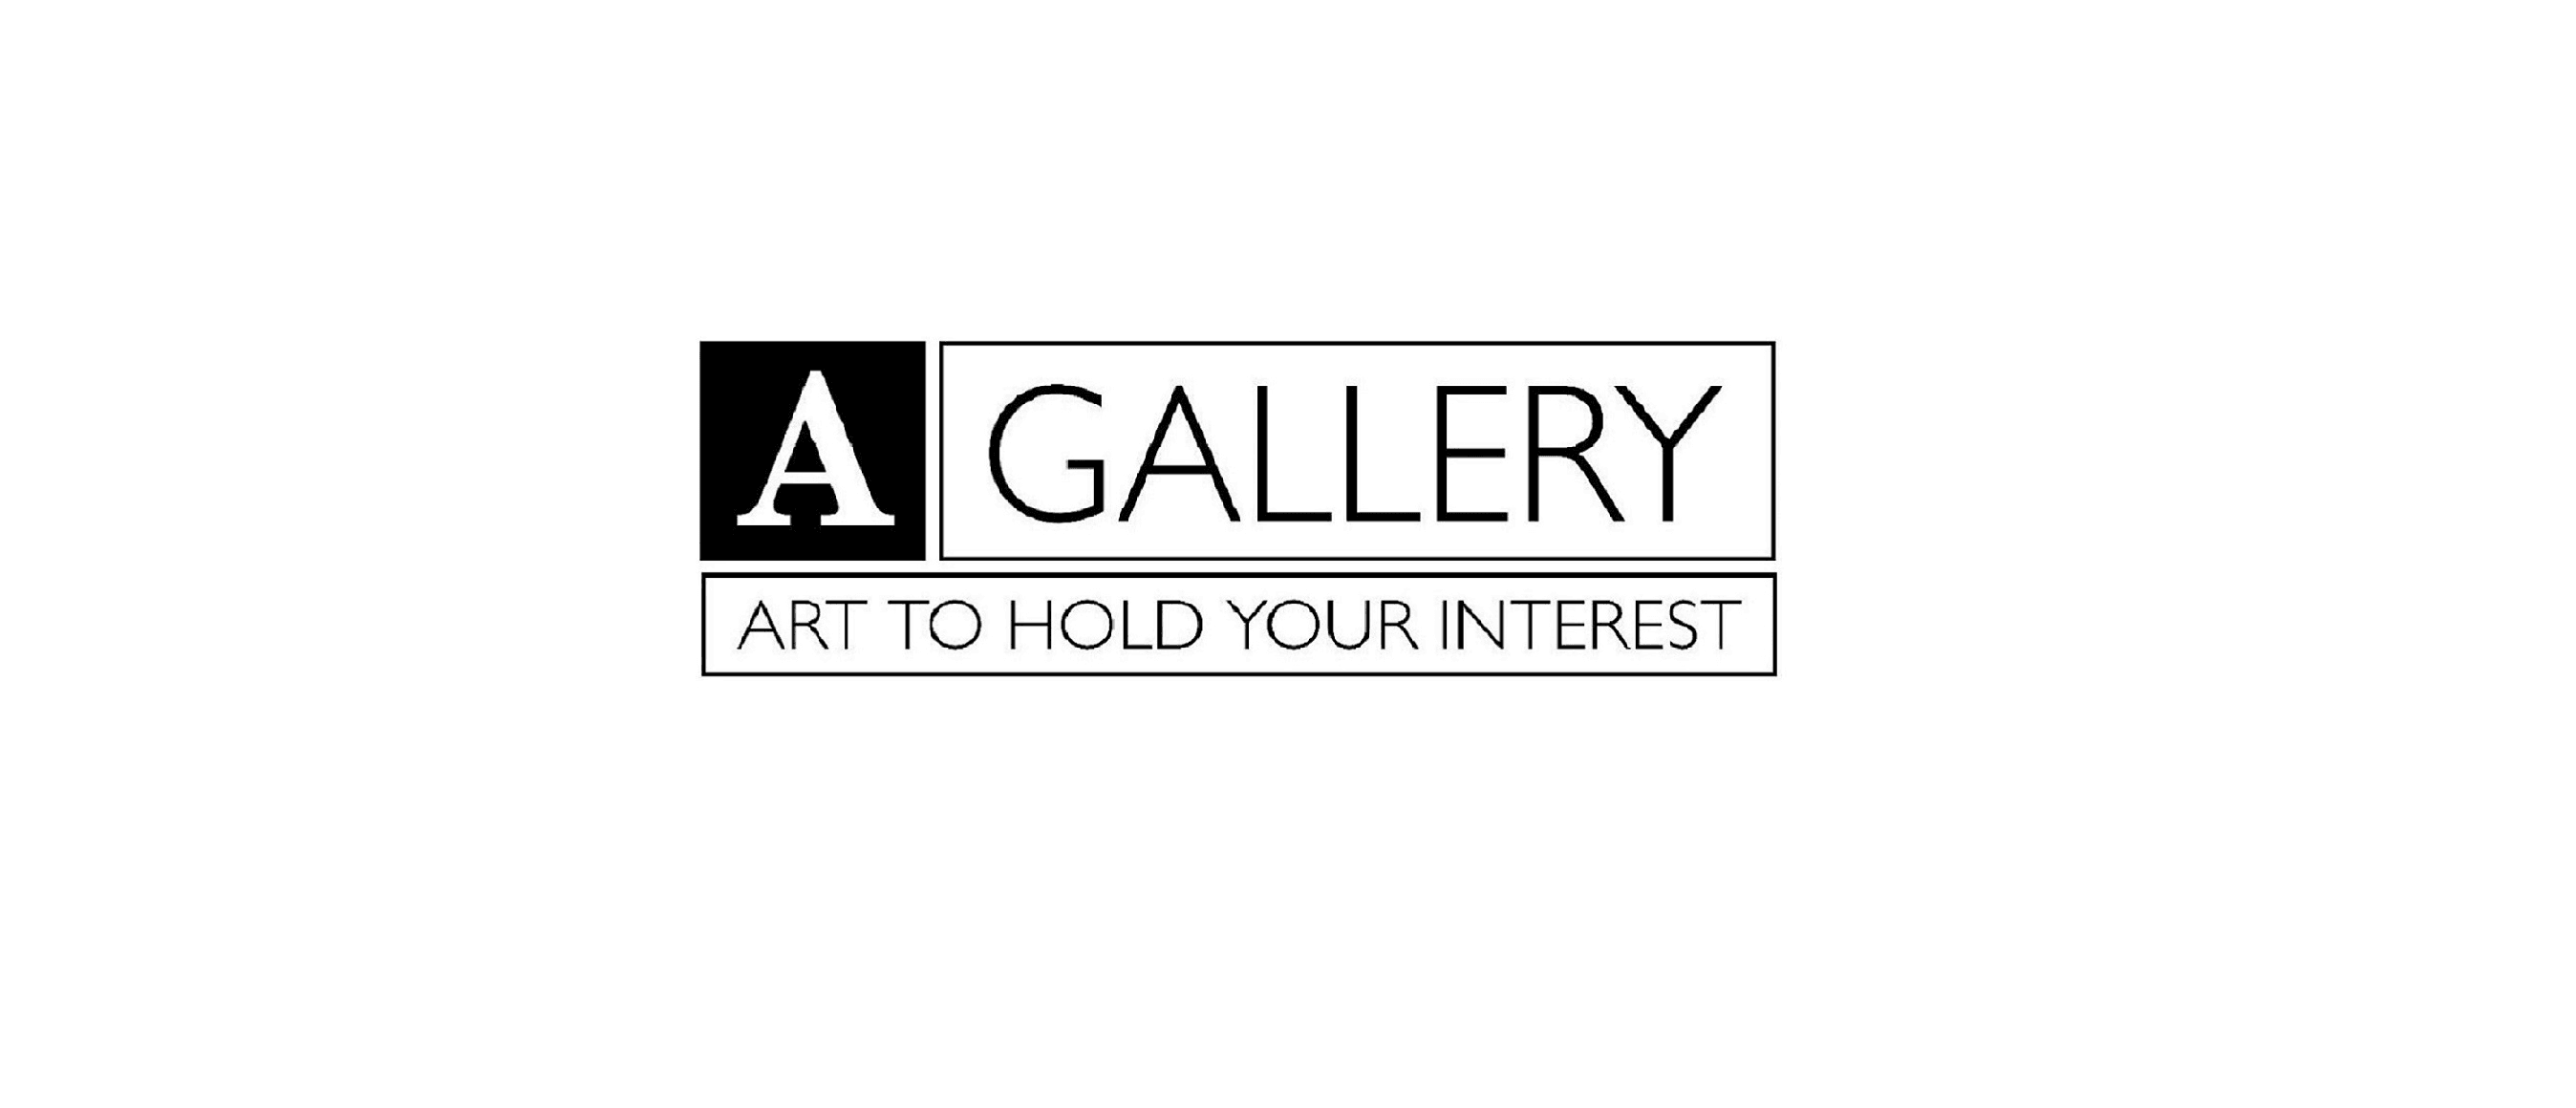 A Gallery Artists